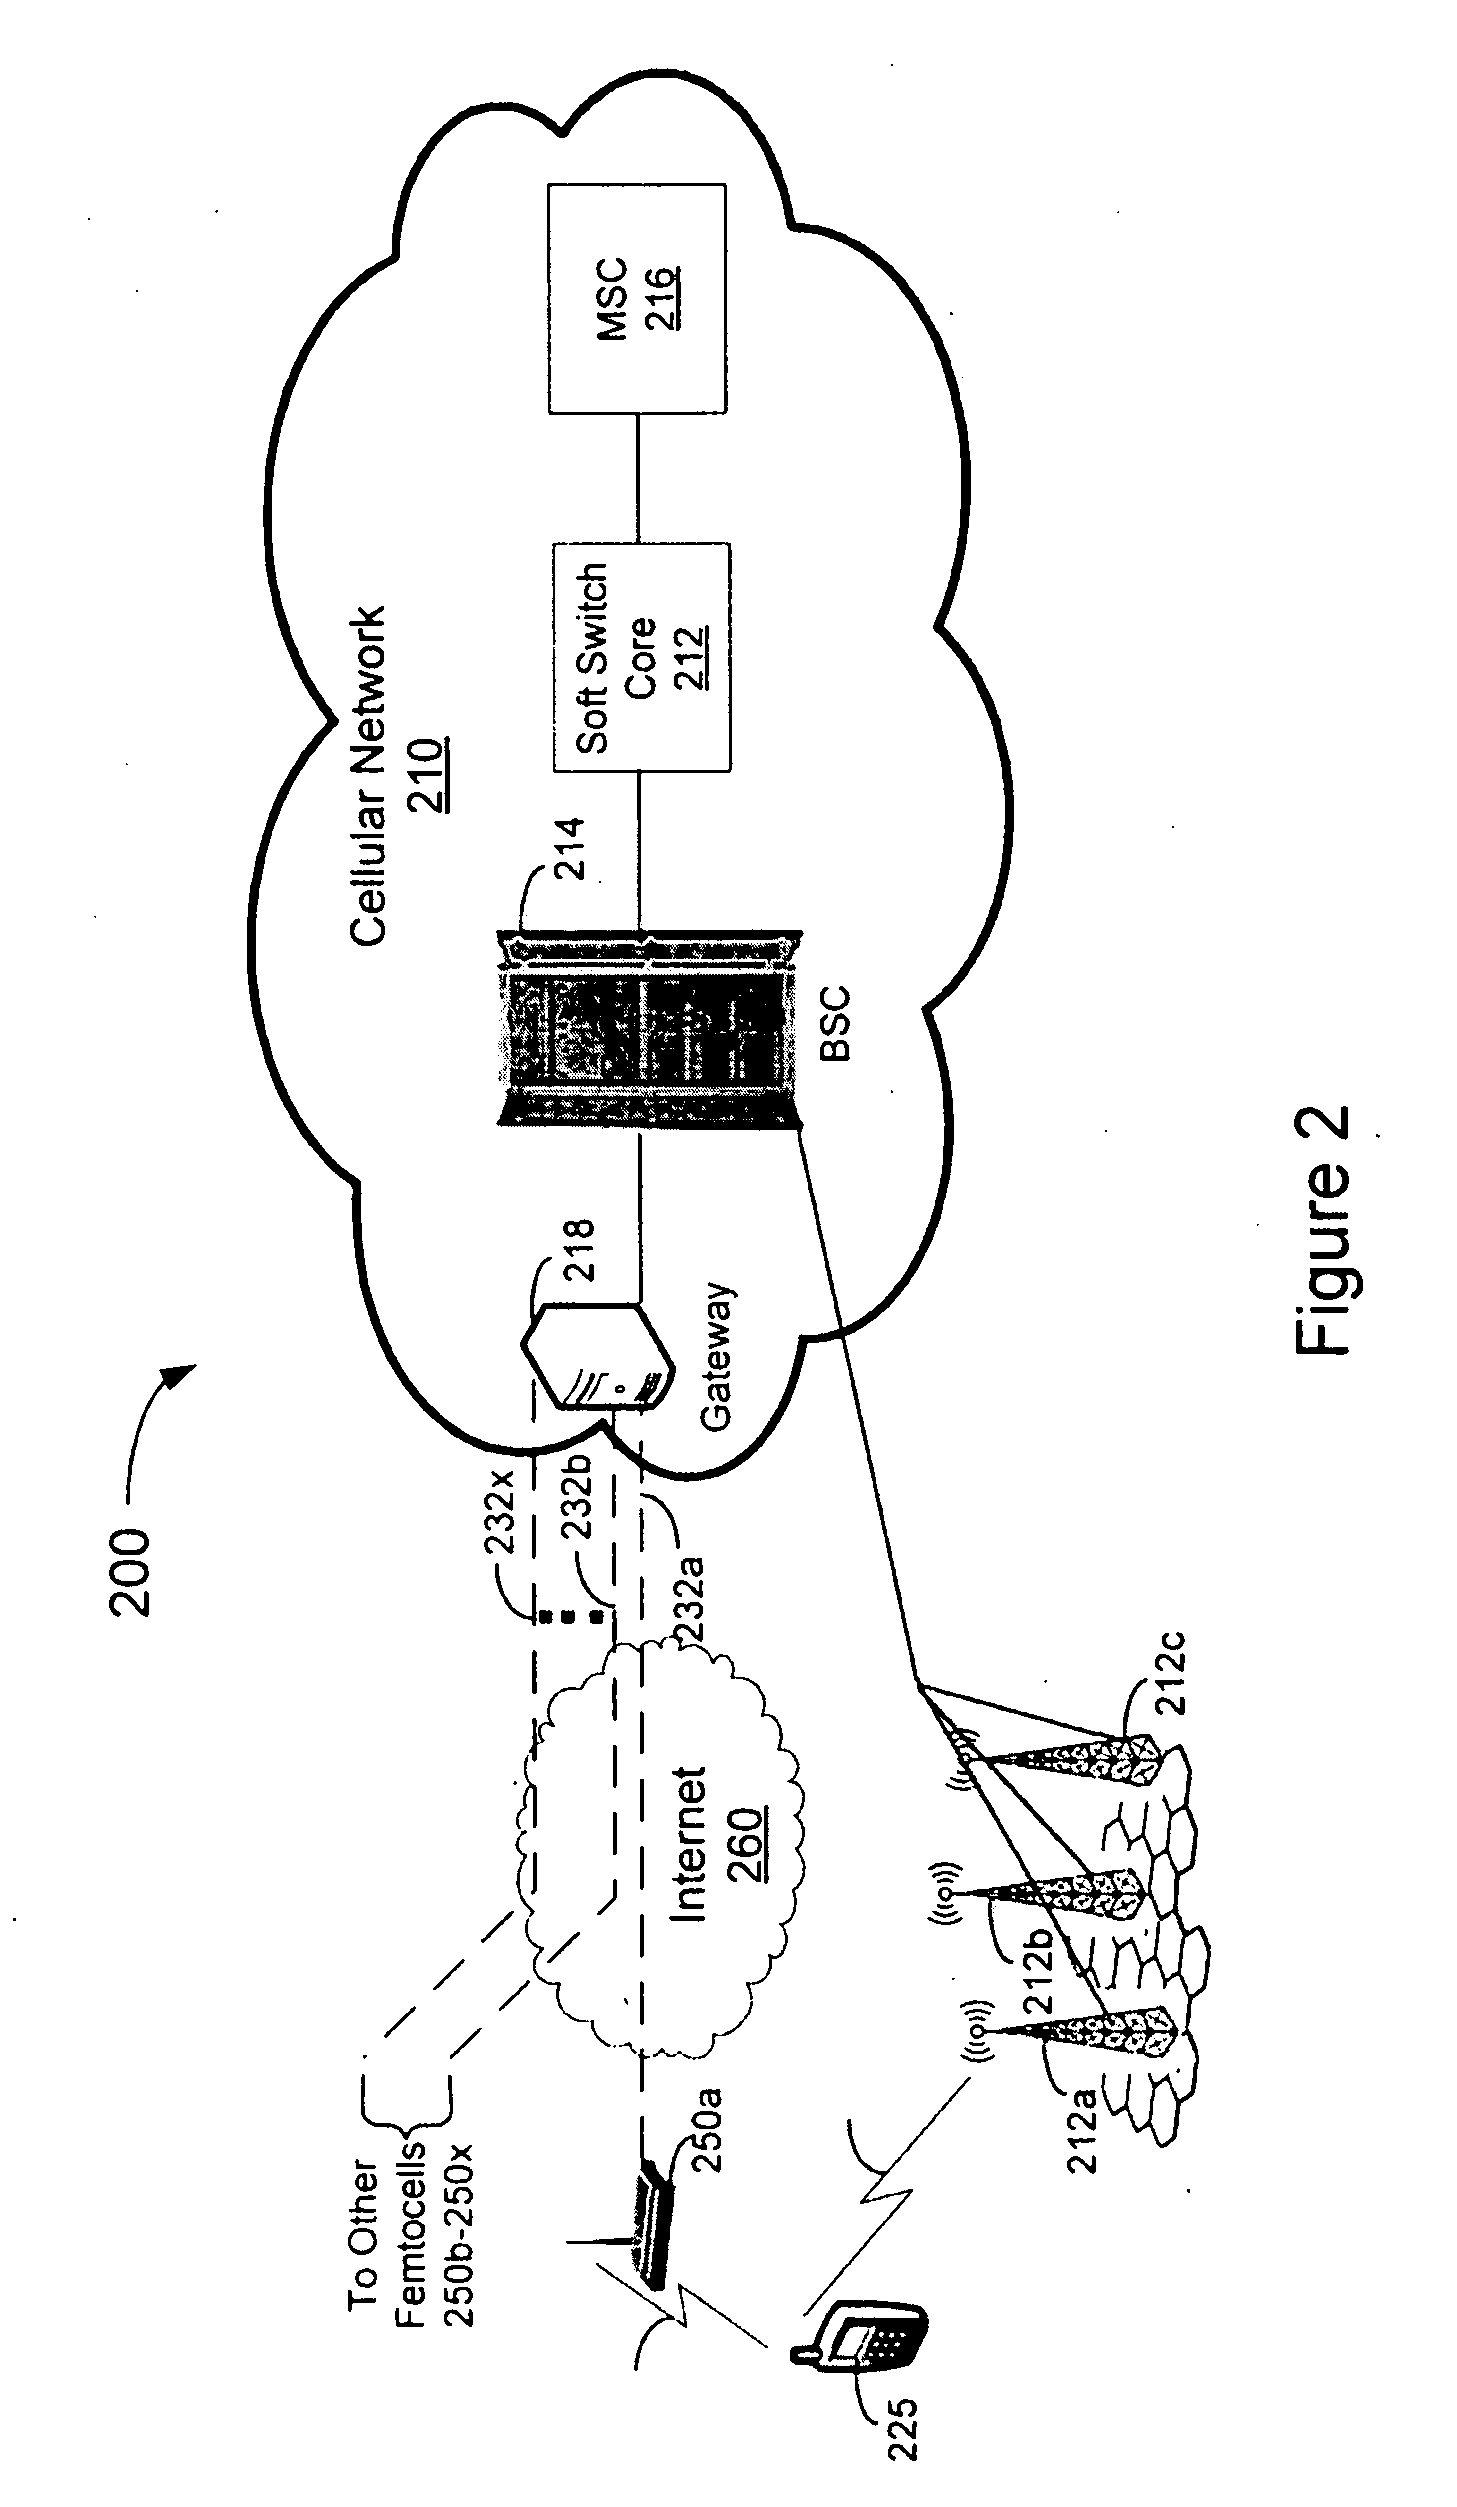 System, method, and computer-readable medium for short message service termination processing by a femtocell system